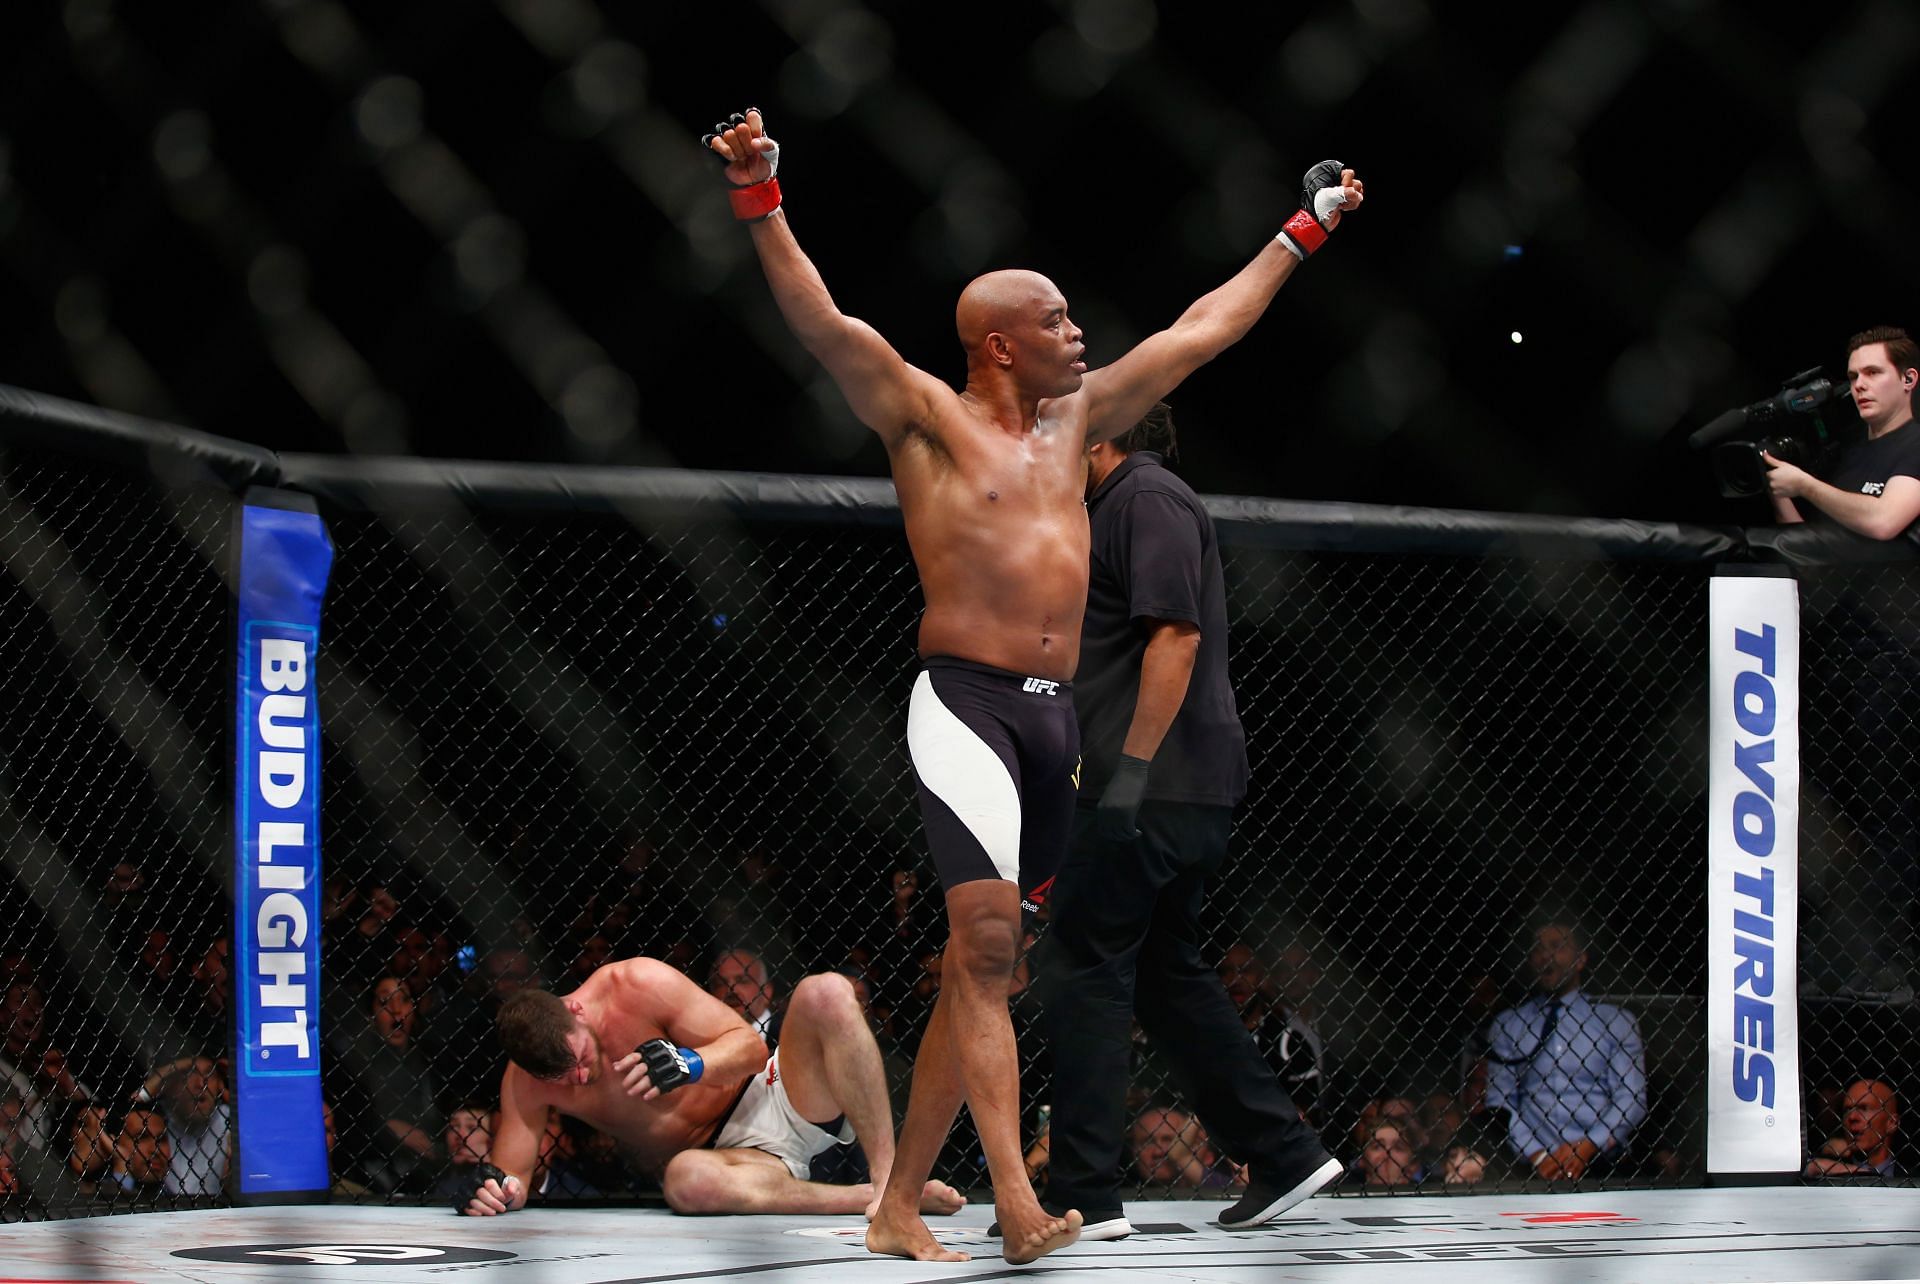 Anderson Silva is 11-2 in UFC title fights